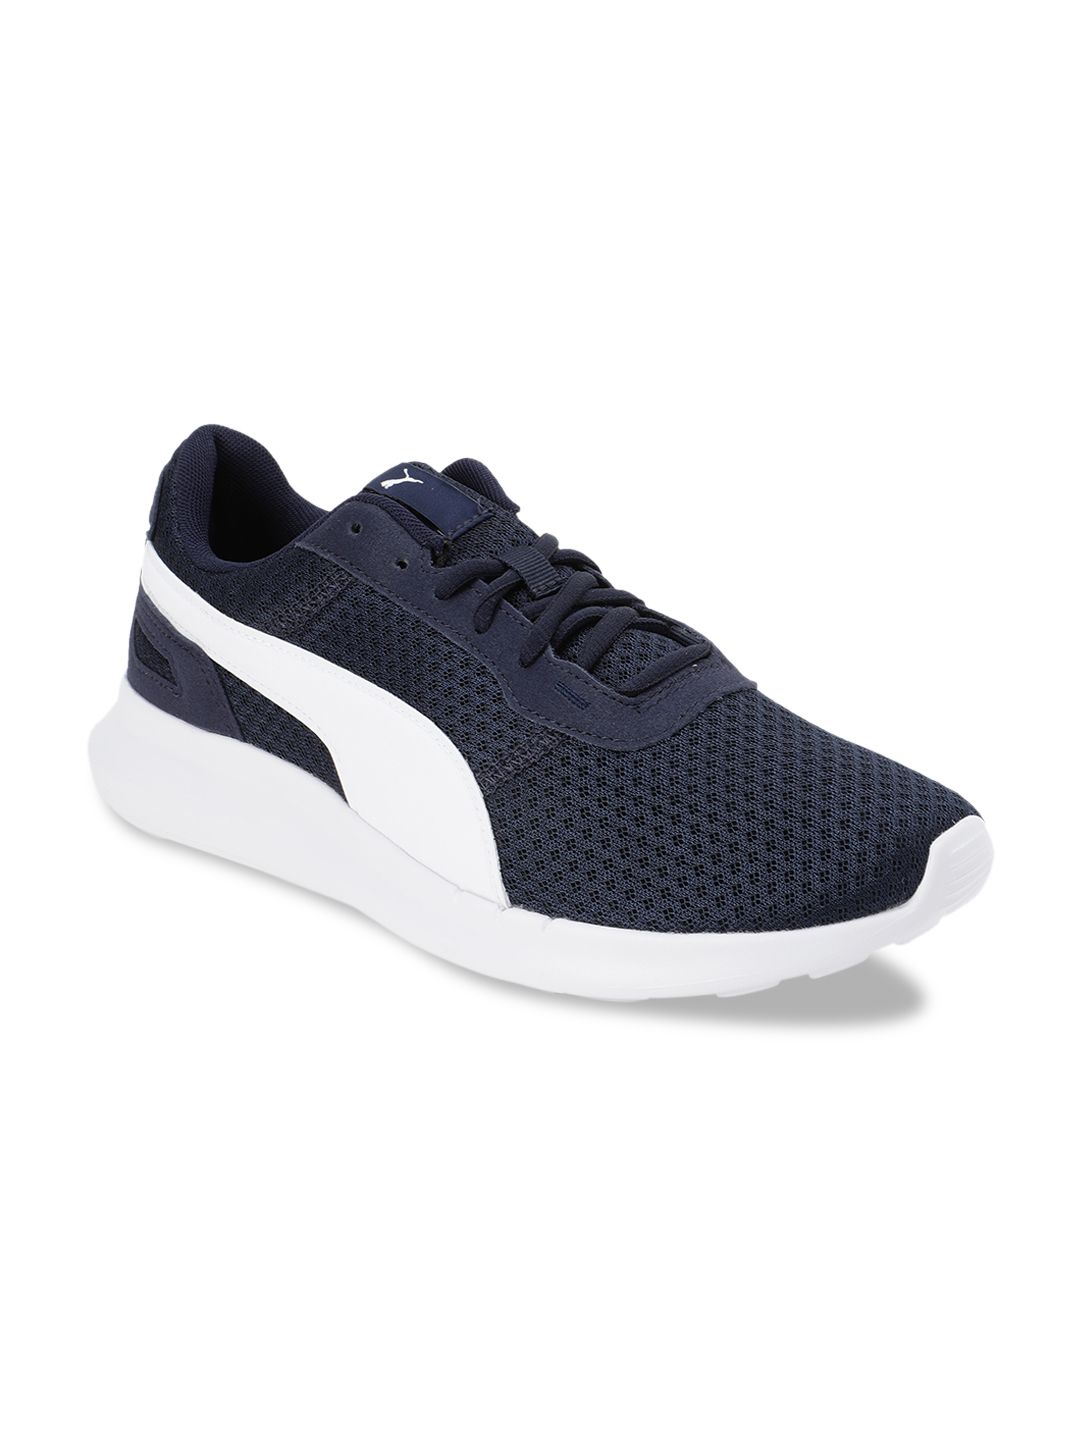 PUMA Unisex Navy Blue ST Activate Running Shoes Price in India